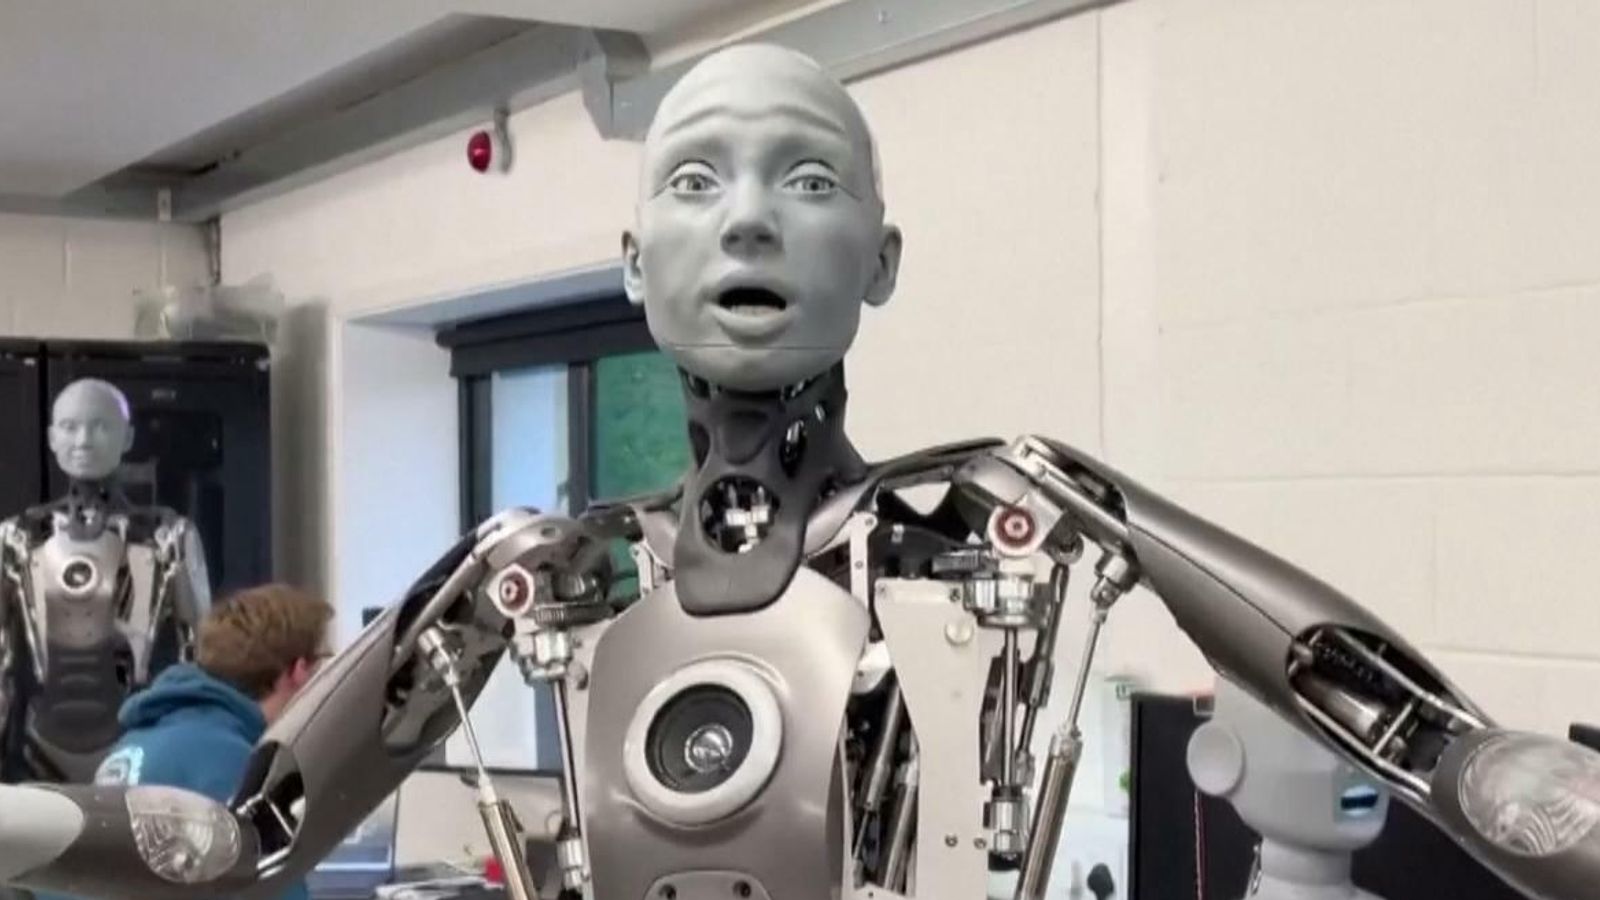 efter skole Mart strømper Video: £100k Robot displays life-like facial expressions and 'could go to  meetings' | Science & Tech News | Sky News